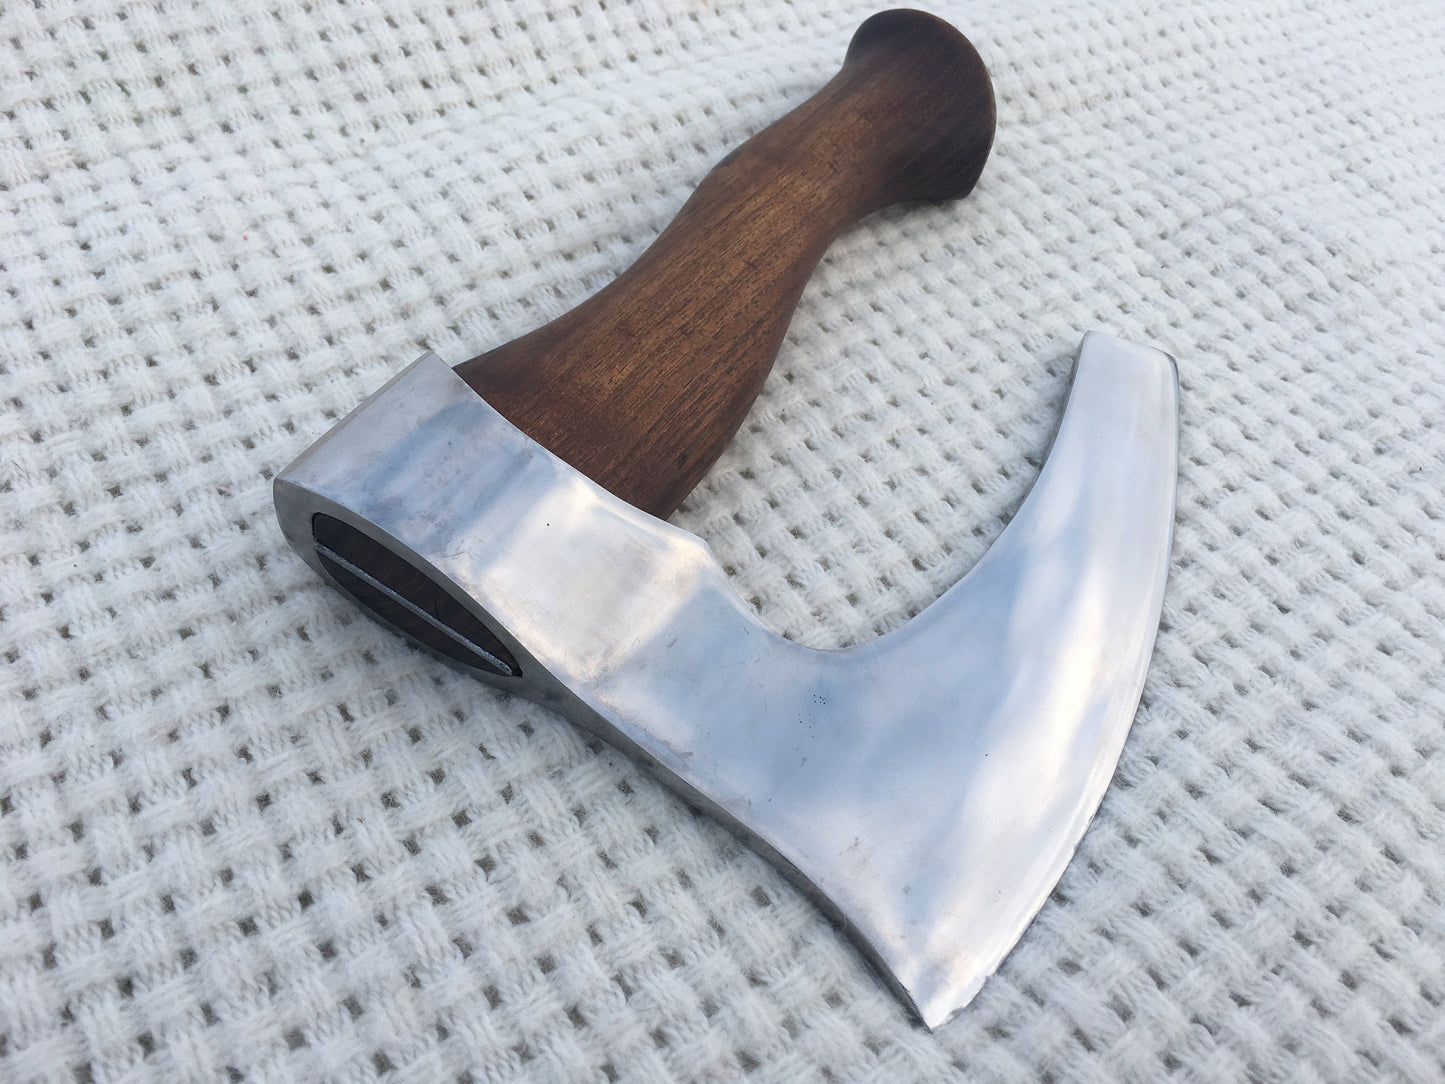 Mens accessories, mens axe, mens valentines gifts, mens clothing, viking axe, hatchet, axe gift, tool lover, mens decor, hand tools, axes